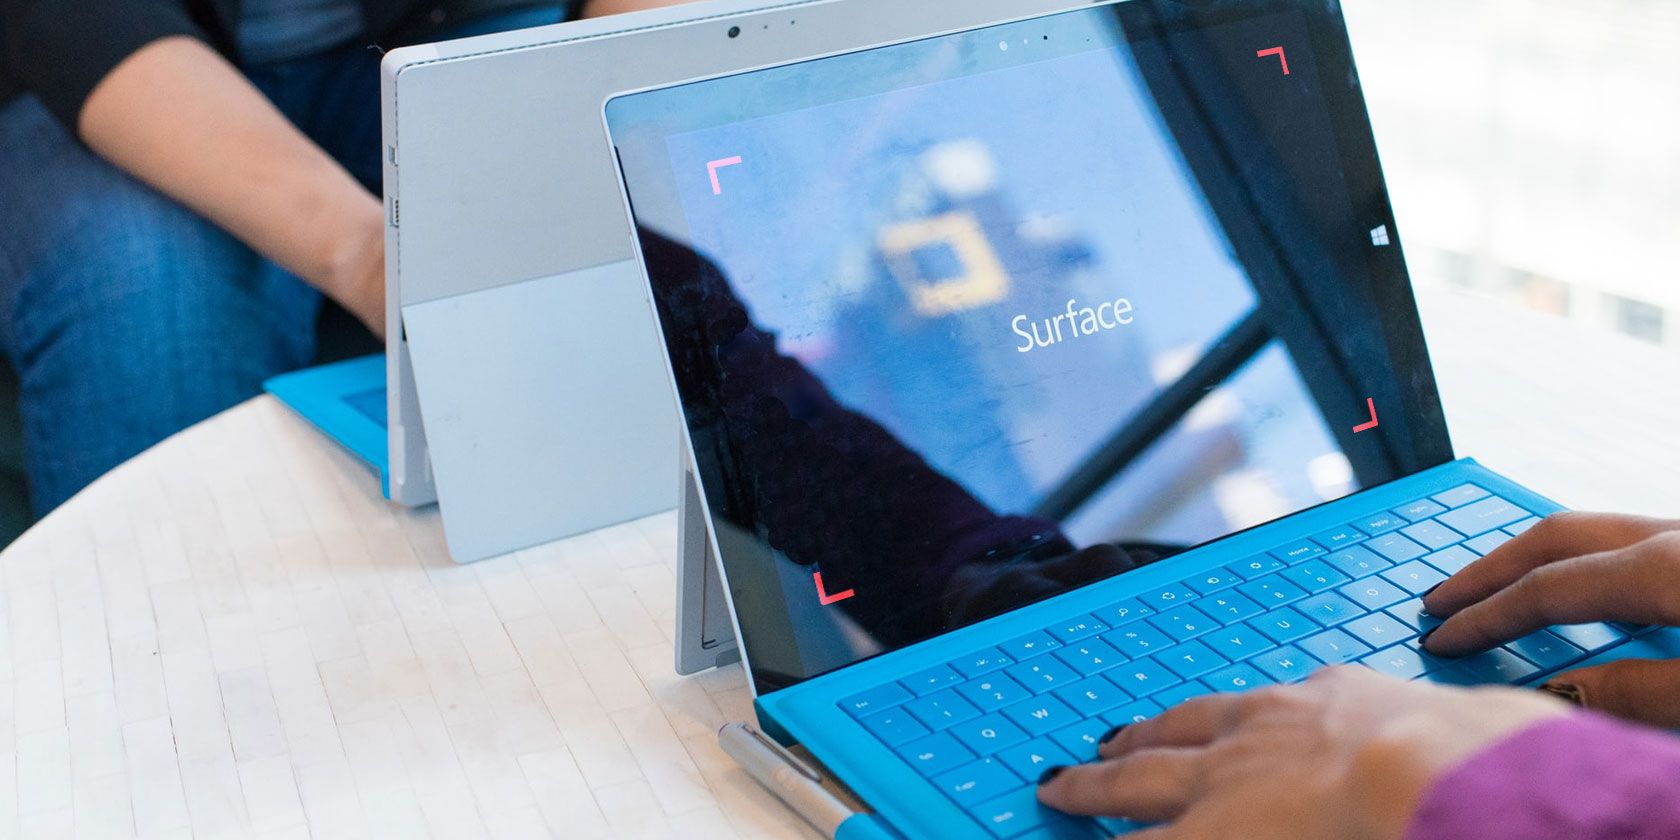 How to Take a Screenshot on a Surface Pro Tablet